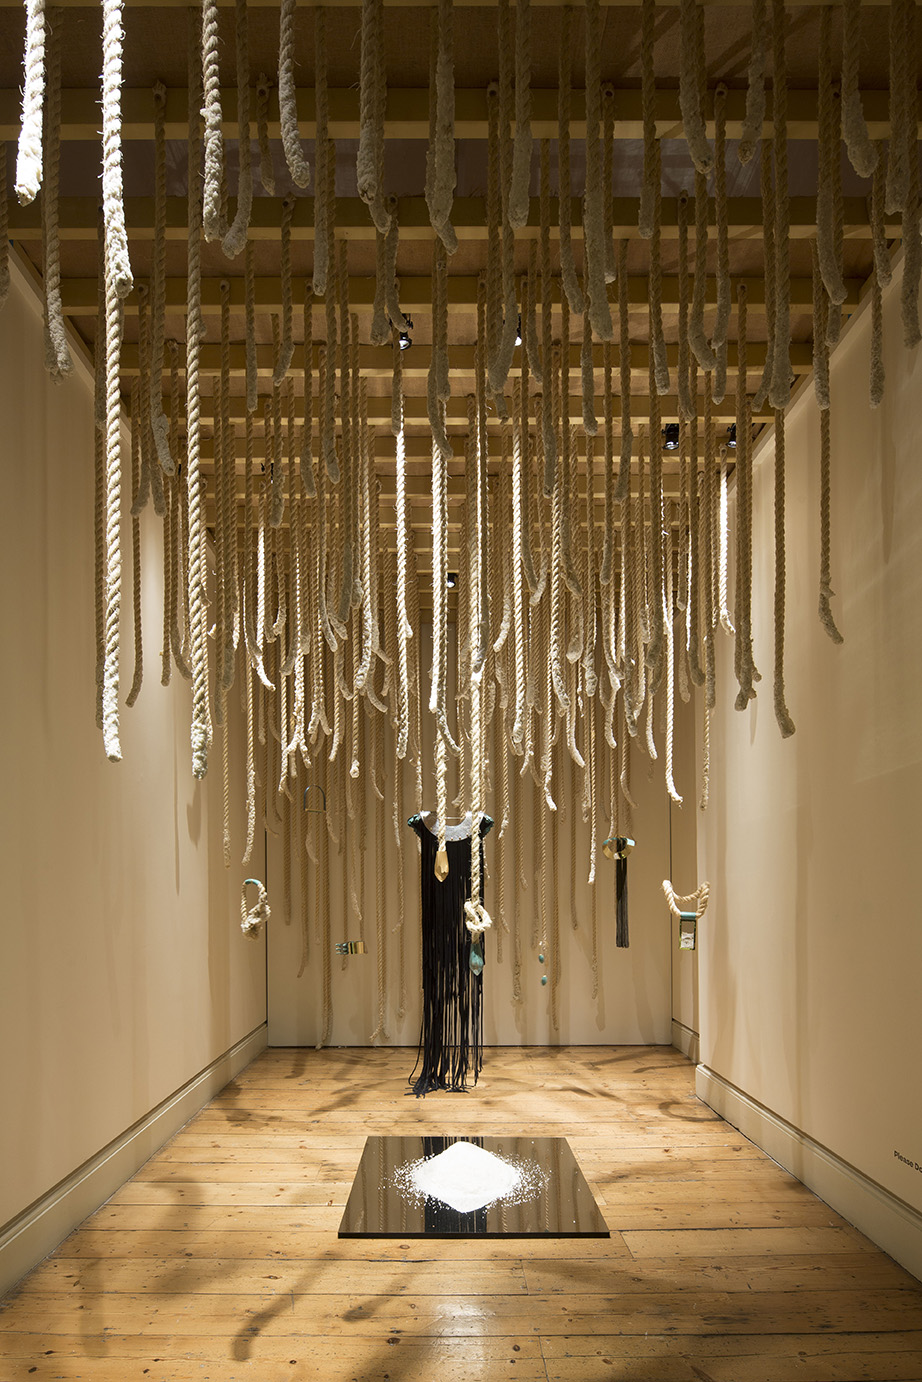 Part of the Salt Of The Earth installation at the 2019 International Fashion Showcase in London, England